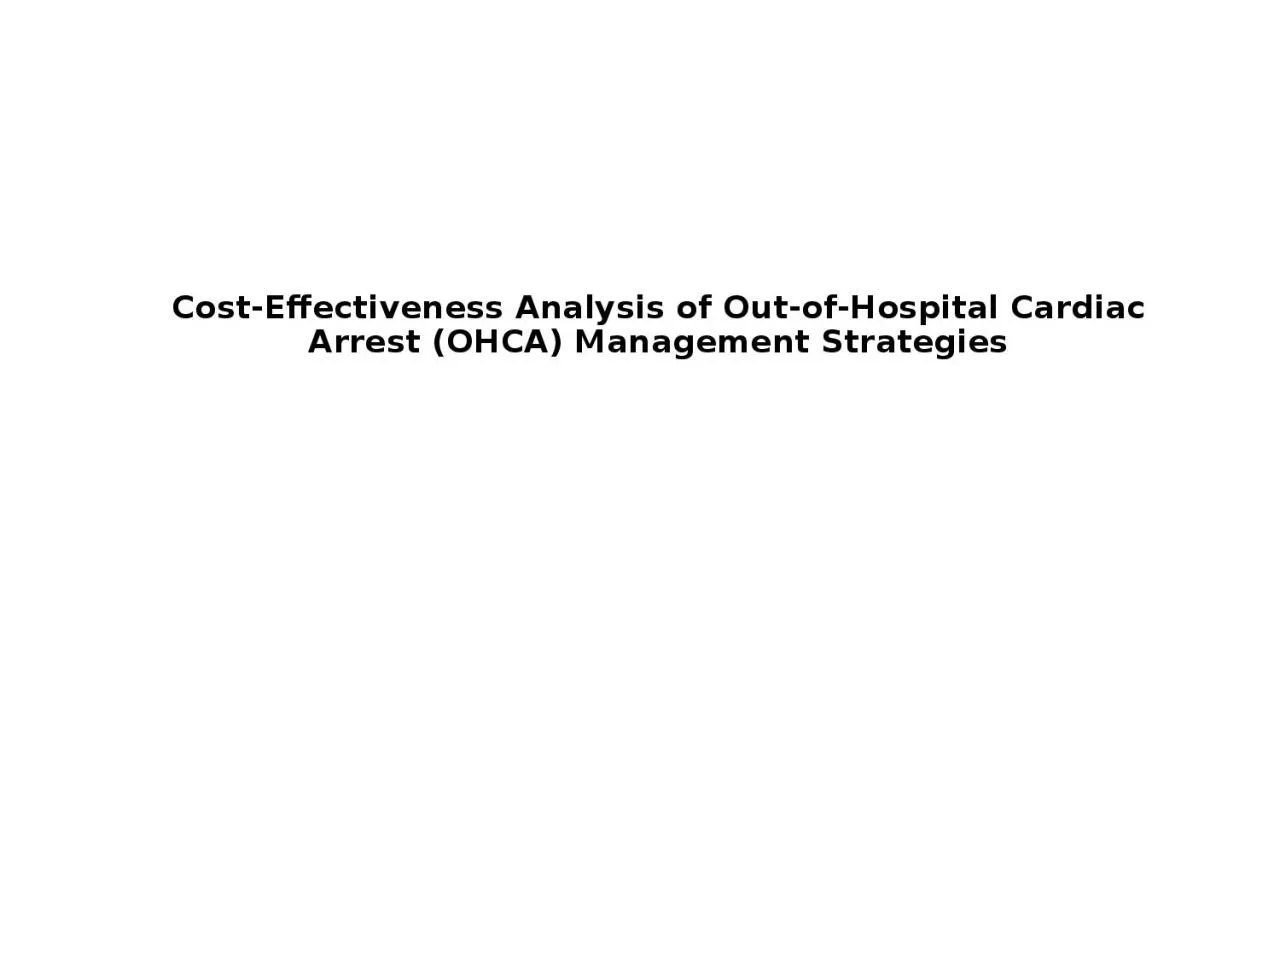   Cost-Effectiveness Analysis of Out-of-Hospital Cardiac Arrest (OHCA) Management Strategies